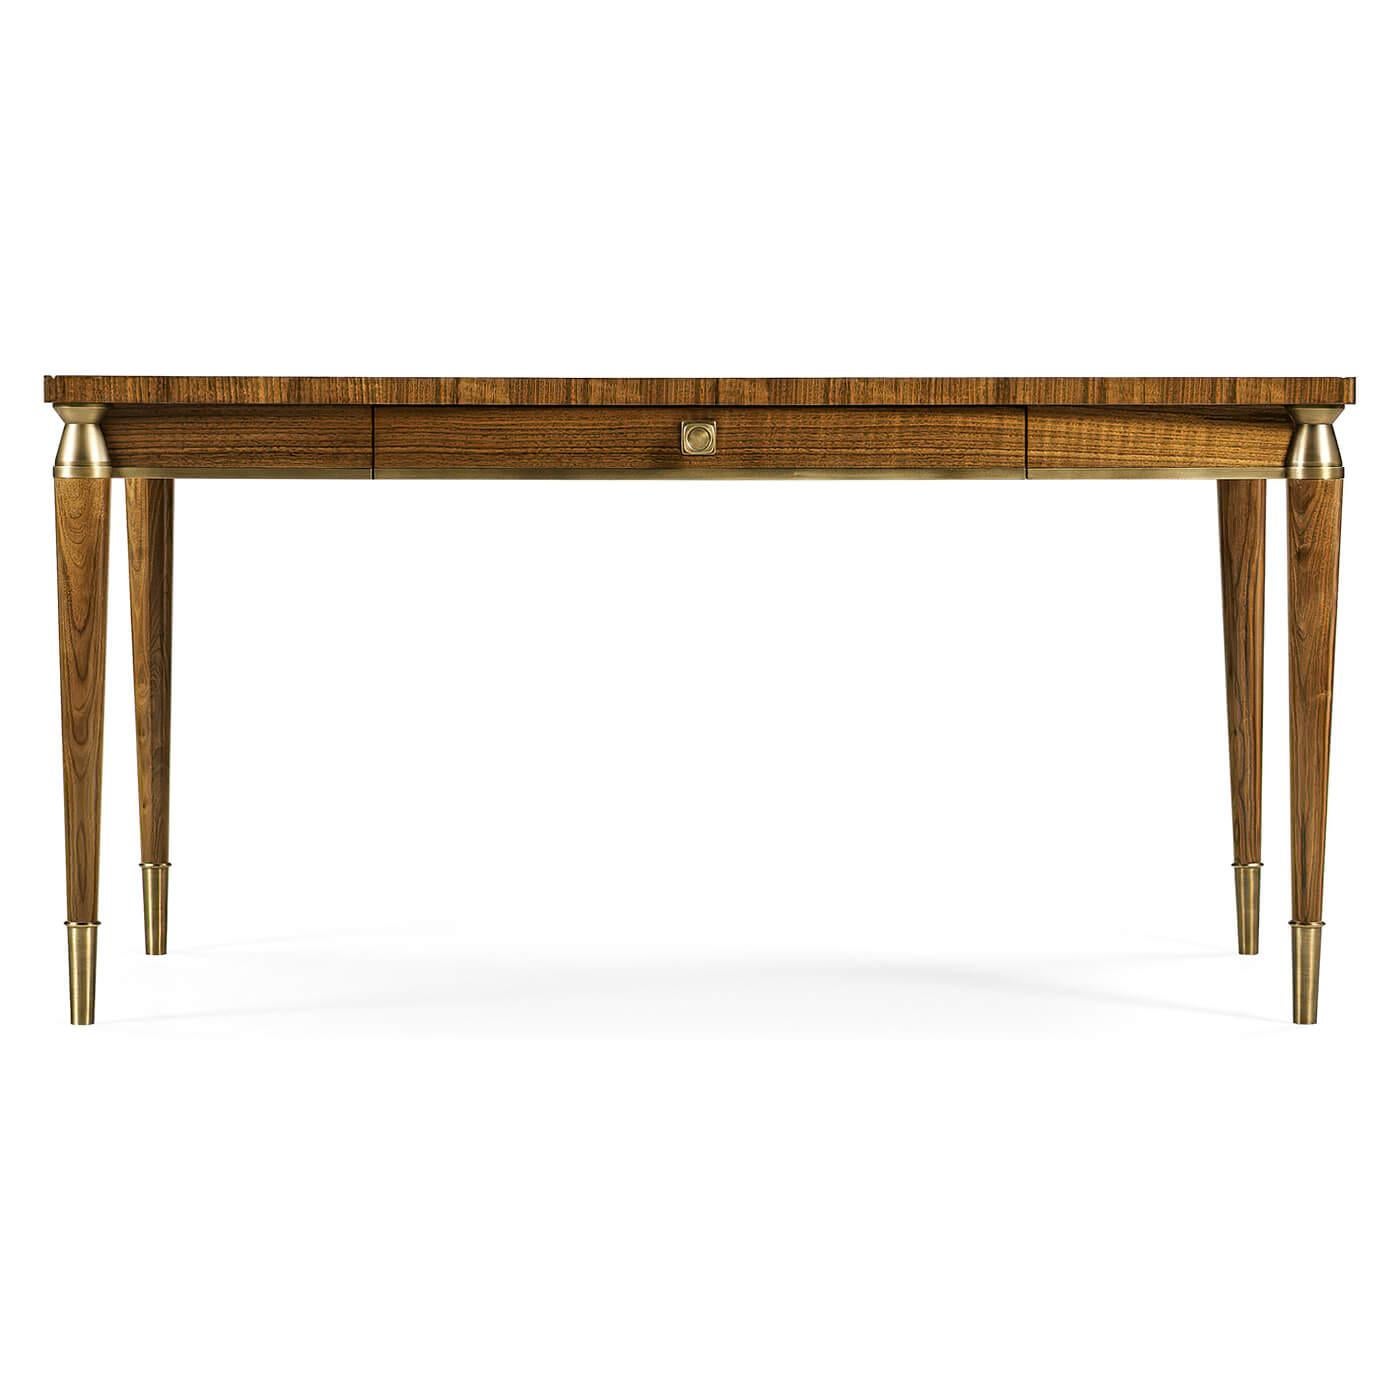 Mid-Century Modern style walnut desk with a quarter veneered writing surface, a long drawer, brass capital, and raised on turned and tapered legs with brass caps.

Dimensions: 60